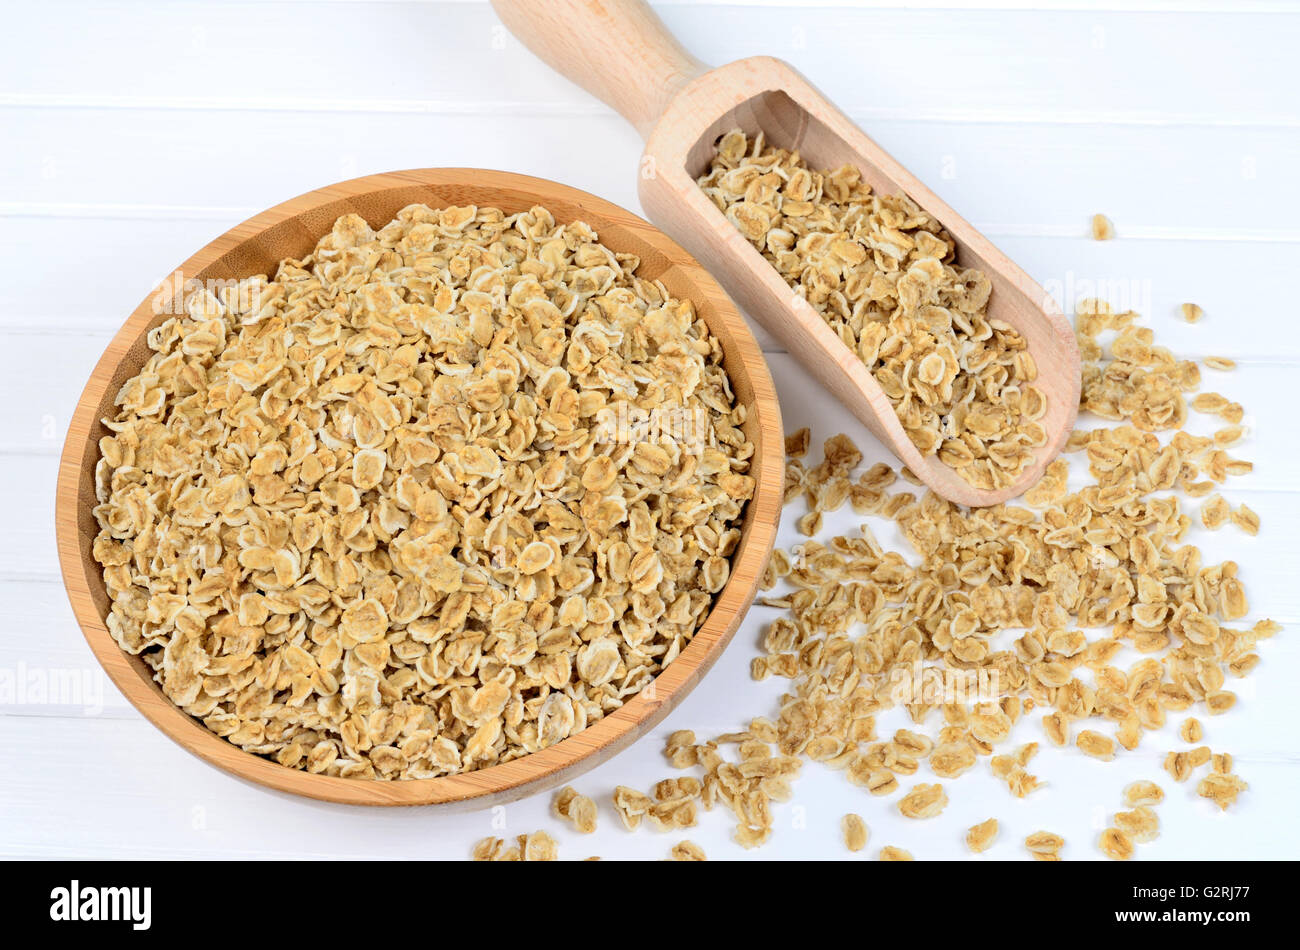 Bowl with oats and scoop on wooden table Stock Photo